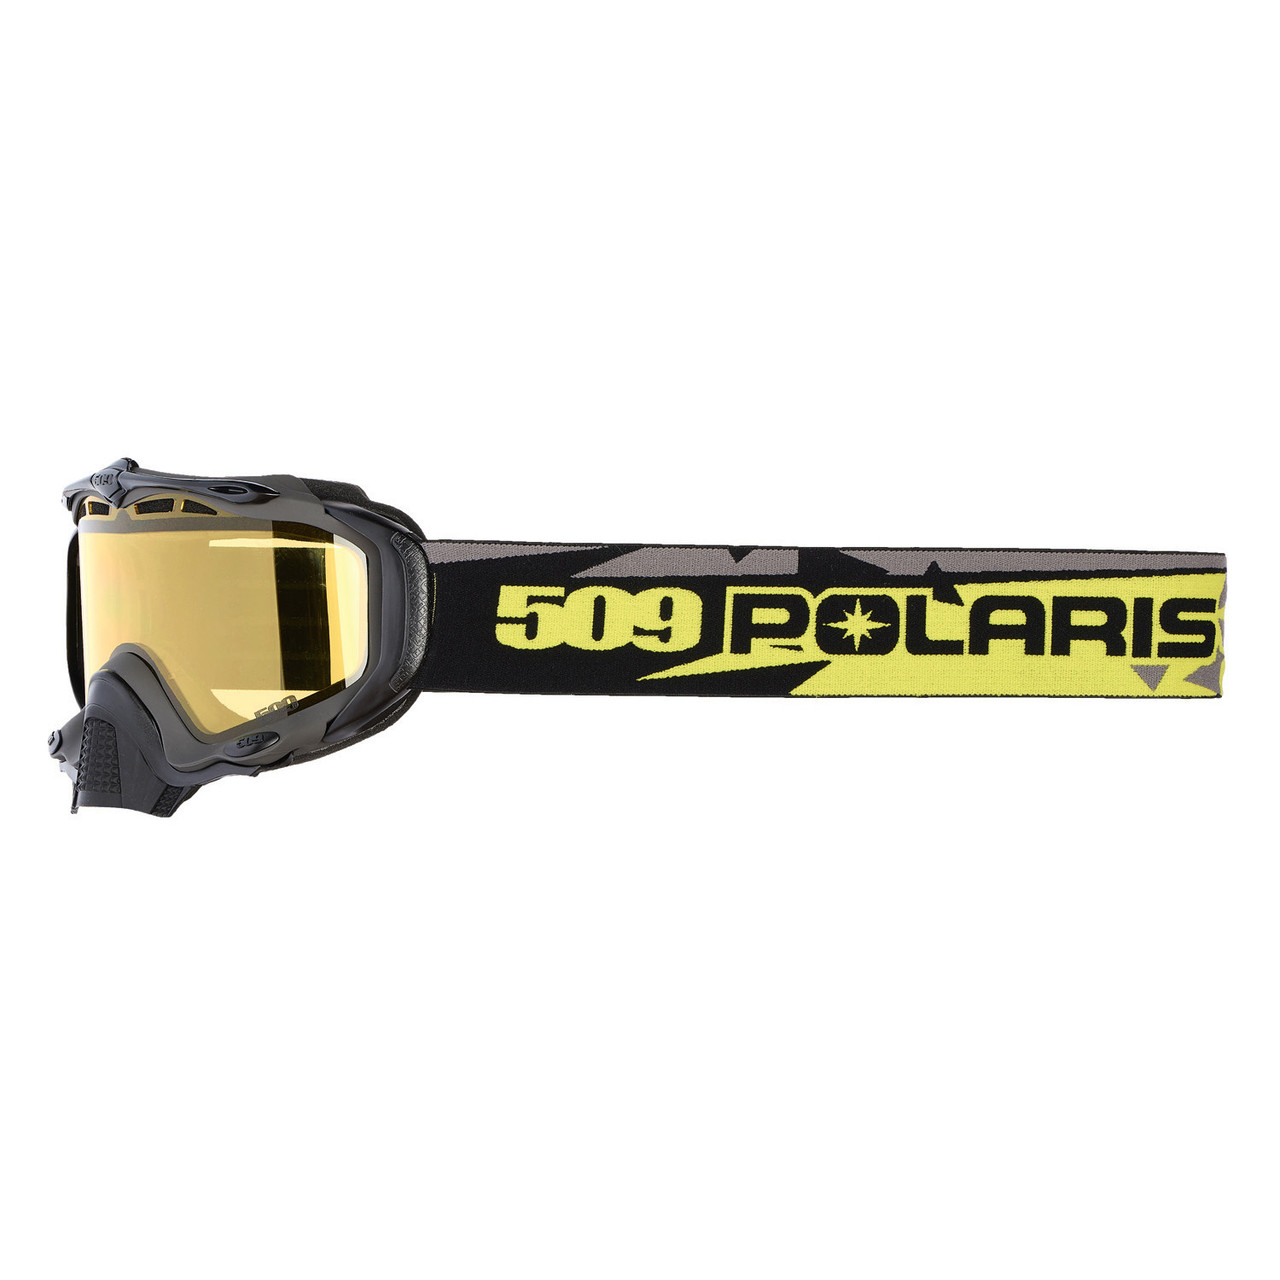 Polaris New OEM 509® Sinister X5 Outrigger Strap Adjustable Snow Goggles 2868530